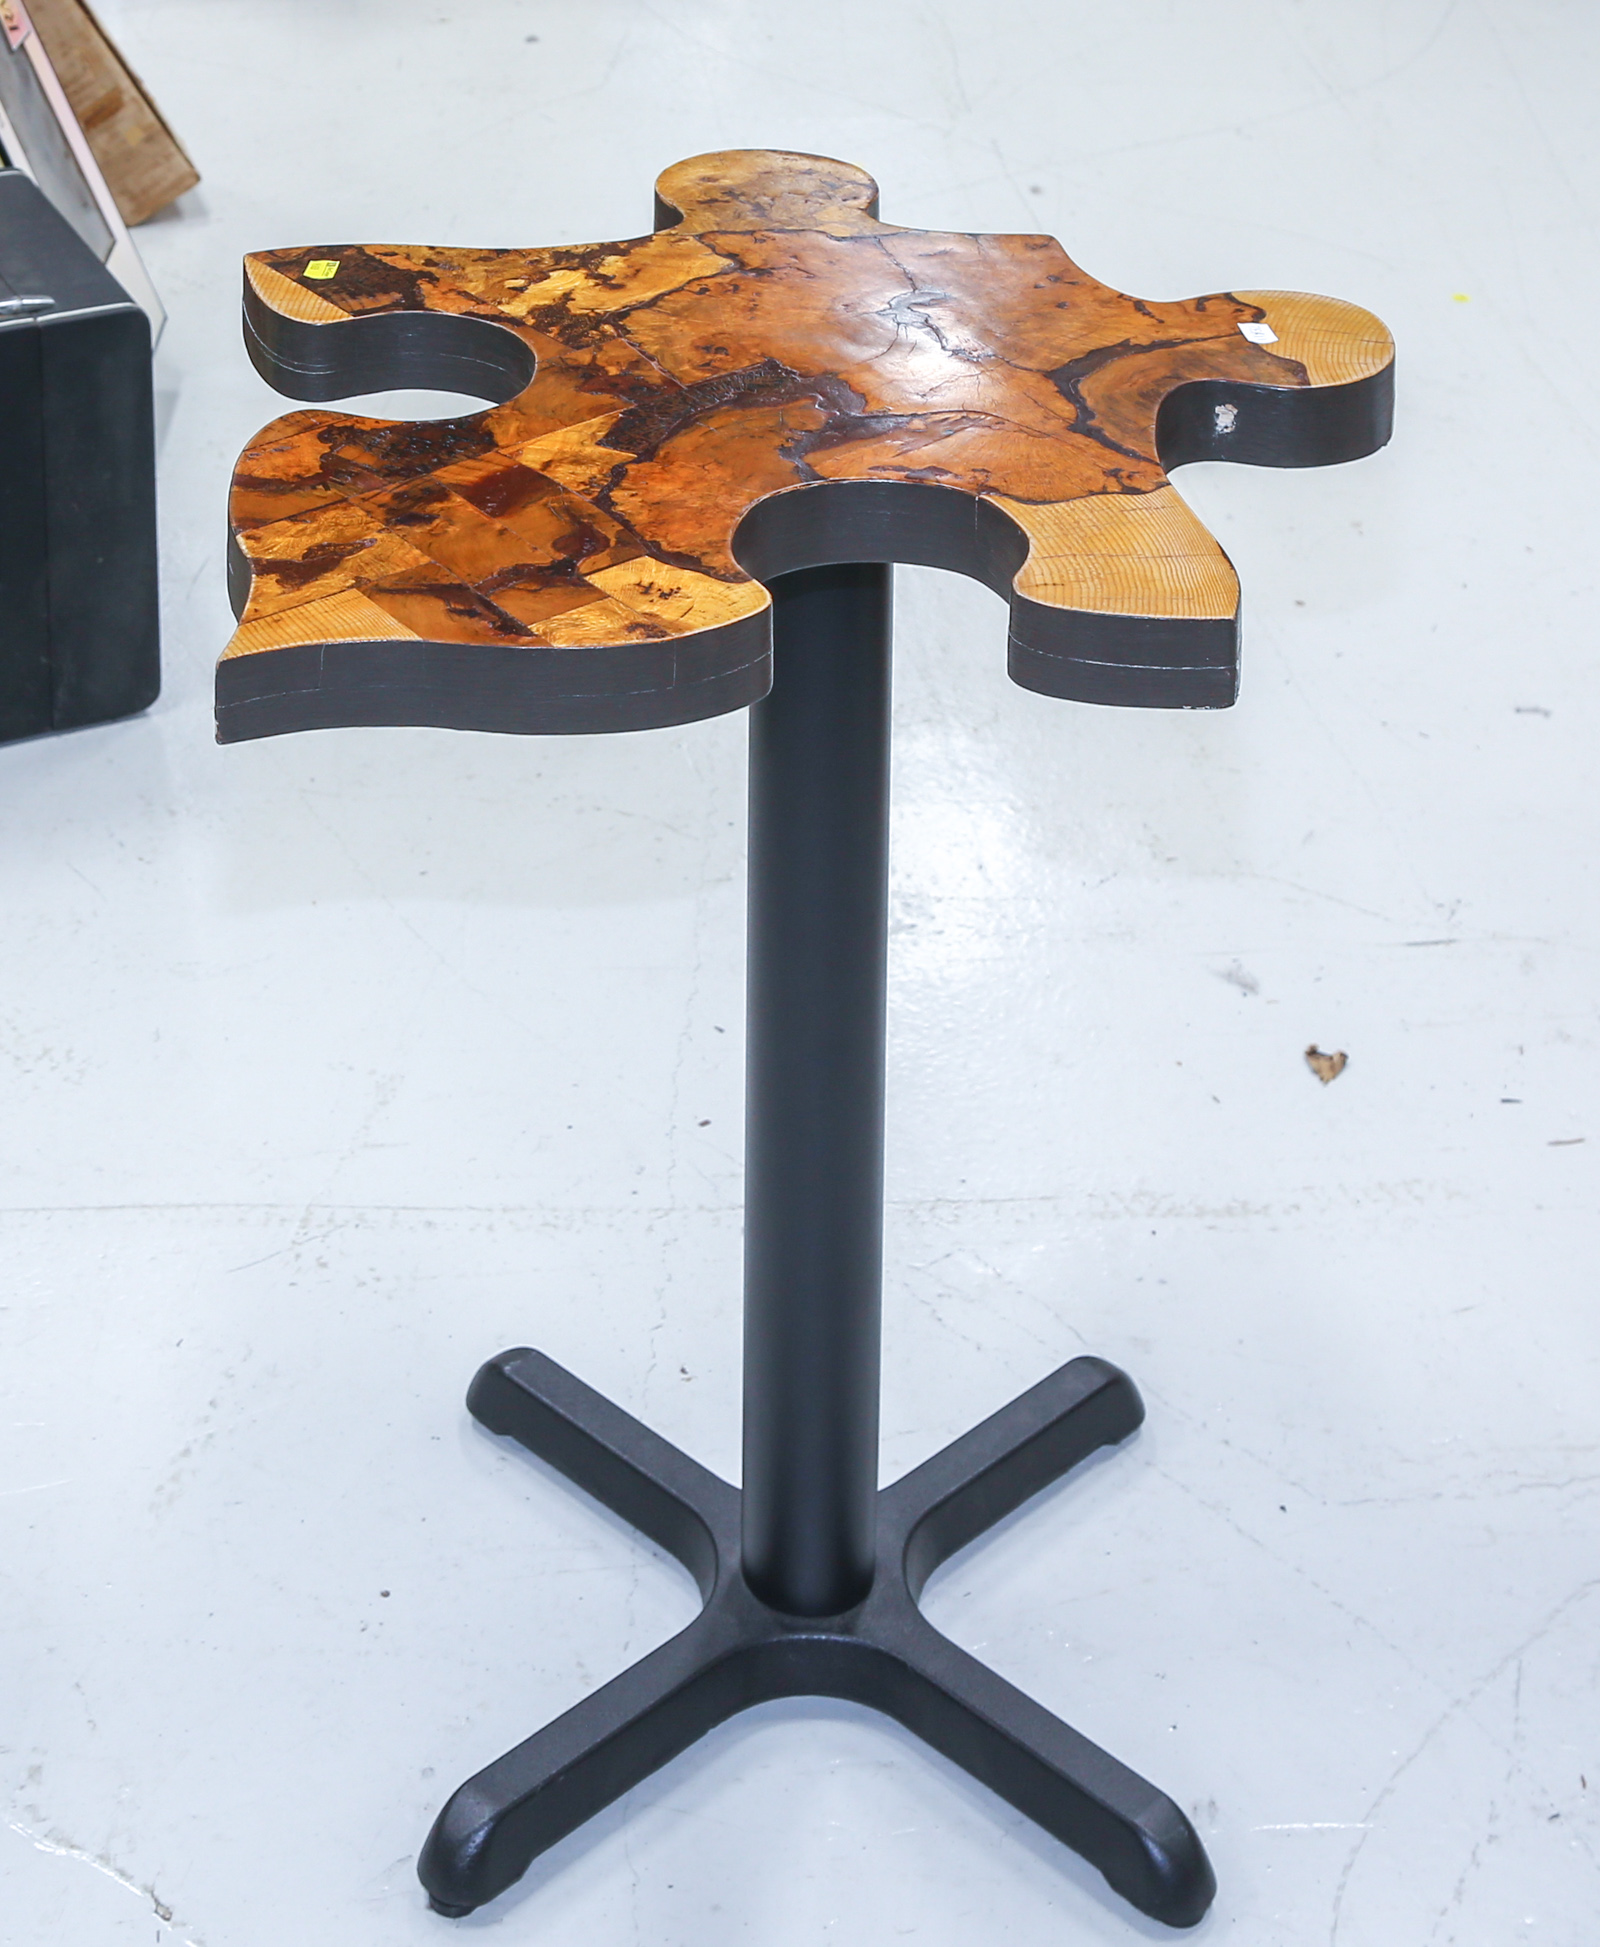 CAFE TABLE WITH JIGSAW PUZZLE PIECE 2ea277